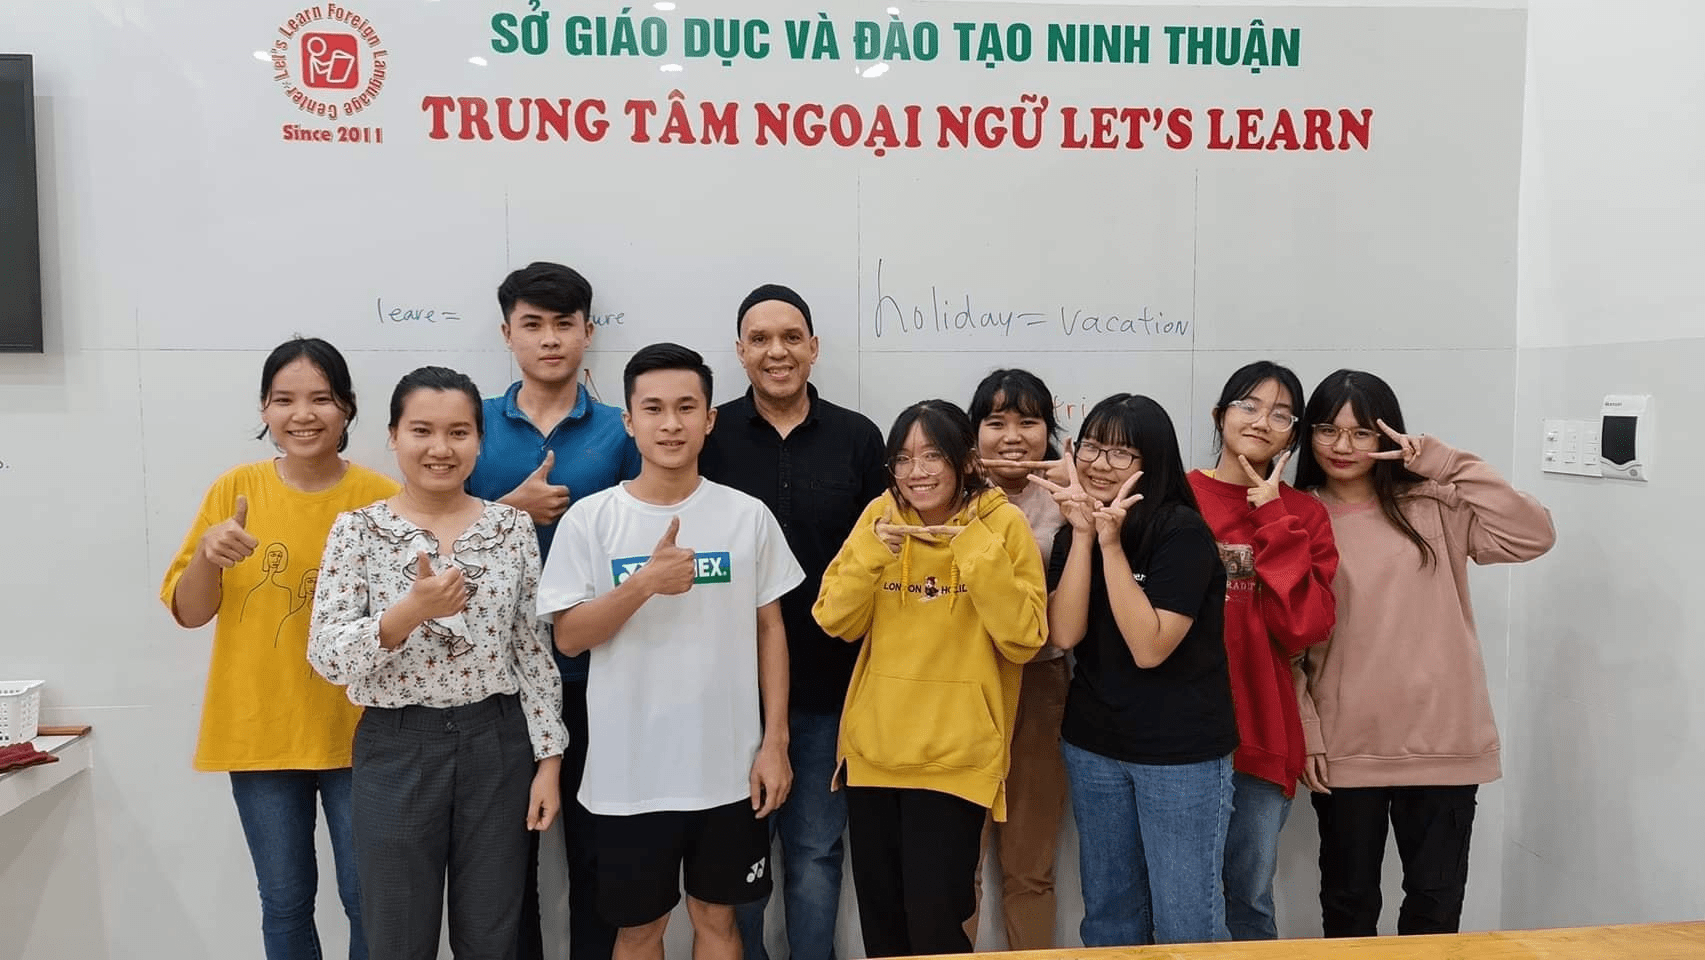 Trung tâm Anh Ngữ Let's Learn